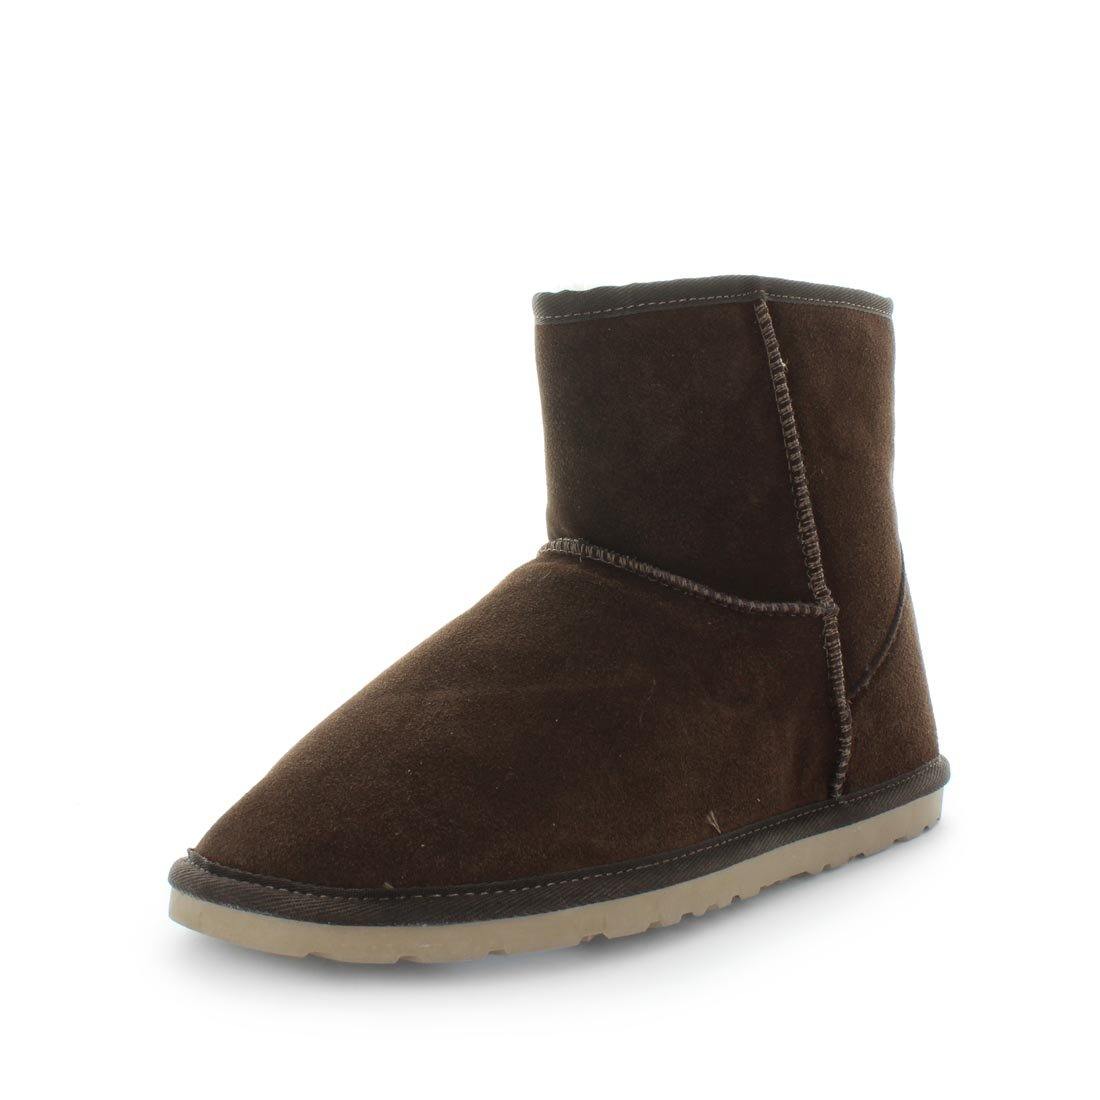 Just Bee UGGs- cafy- Men's classic boot style slipper, 100% wool, leather shoe with detailed upper and over hanging wool on the trim - Men's comfort slippers - Men's best slippers- UGGs (6536948285519)